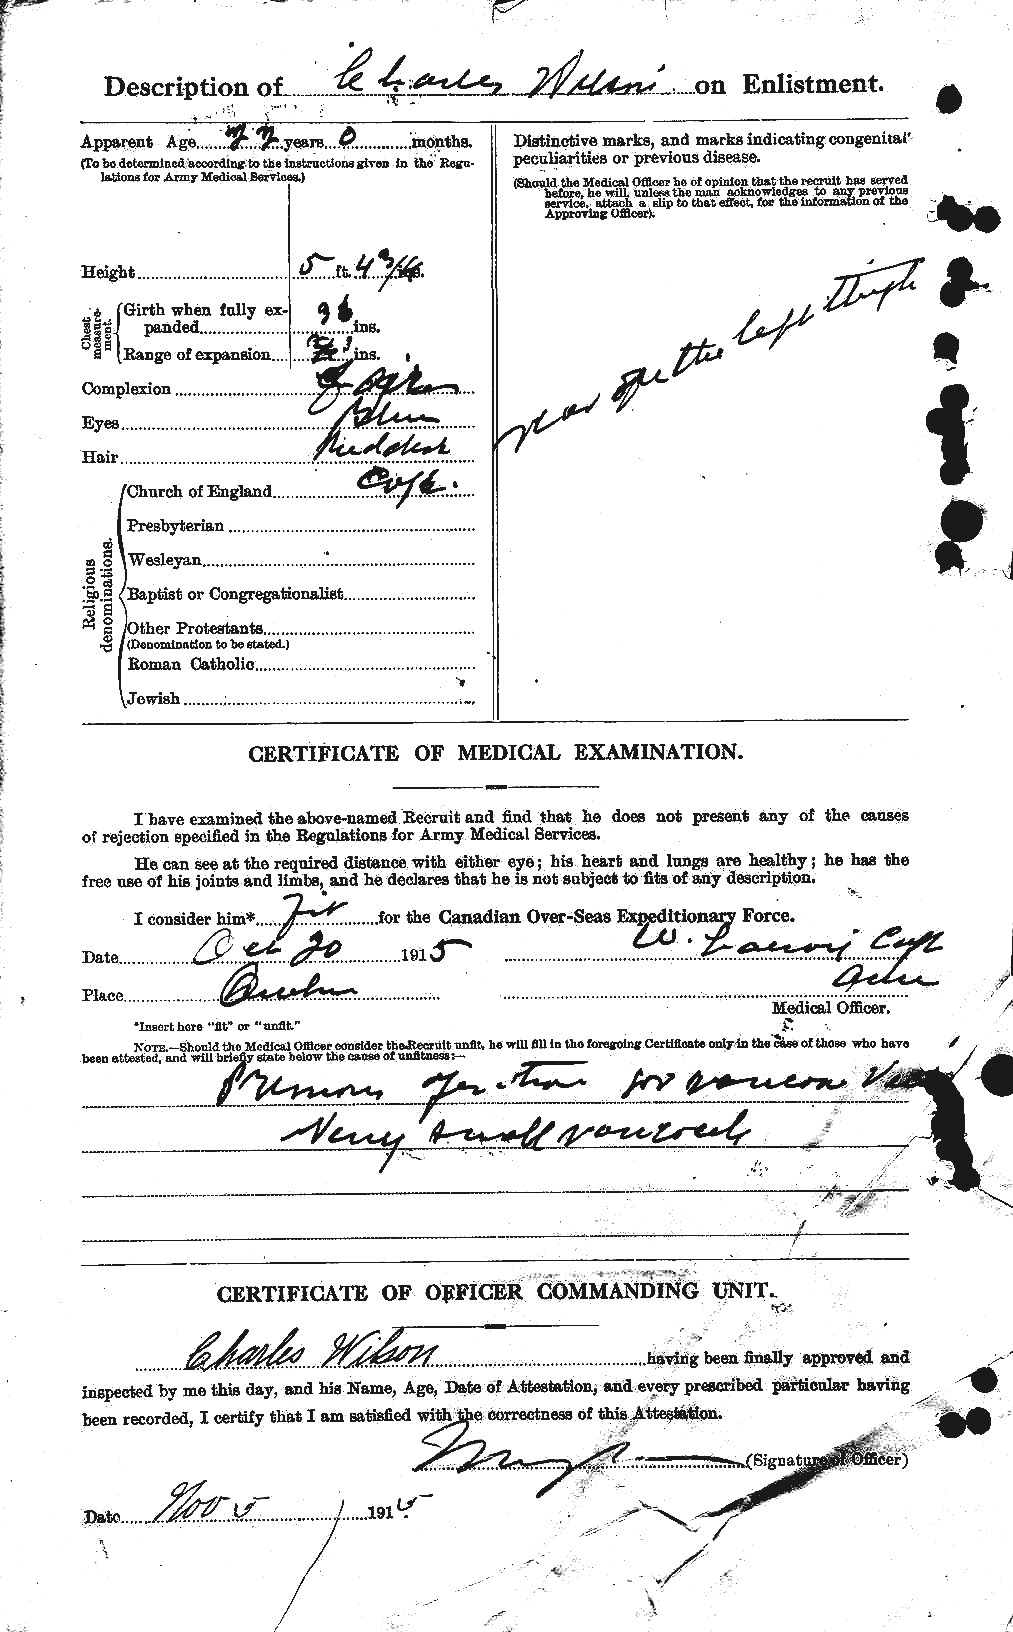 Personnel Records of the First World War - CEF 677870b